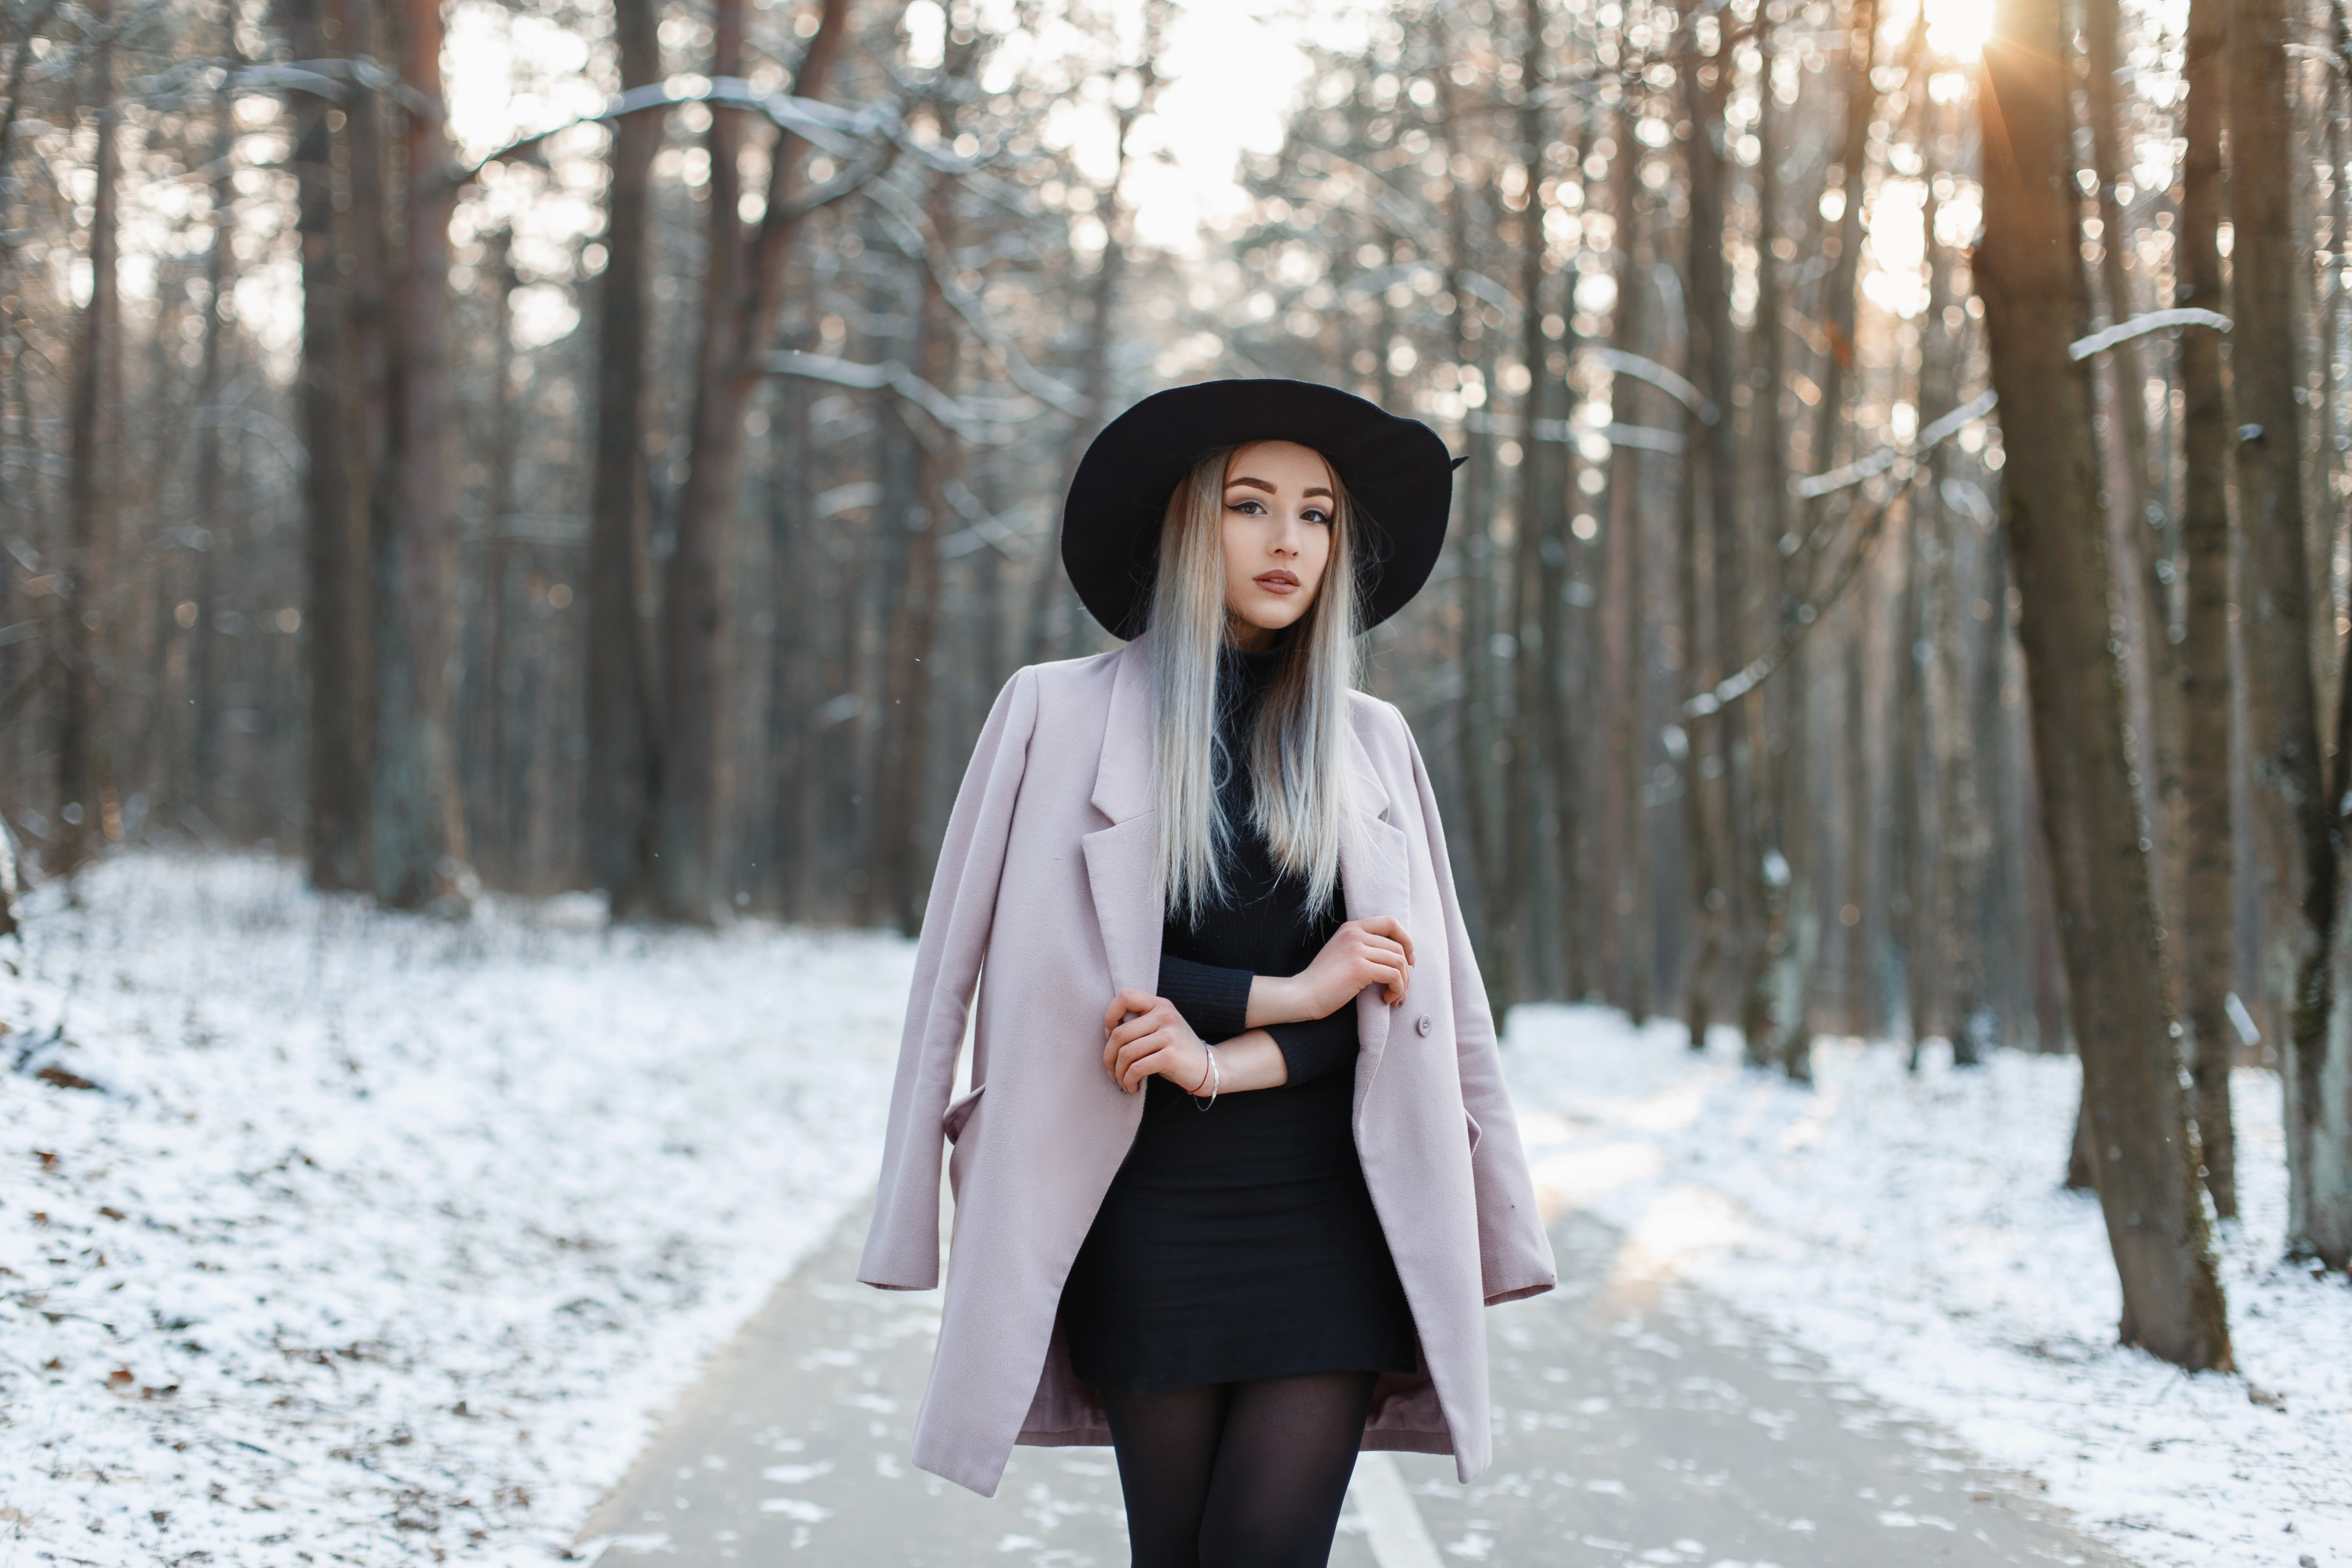 How to Wear a Dress in the Winter